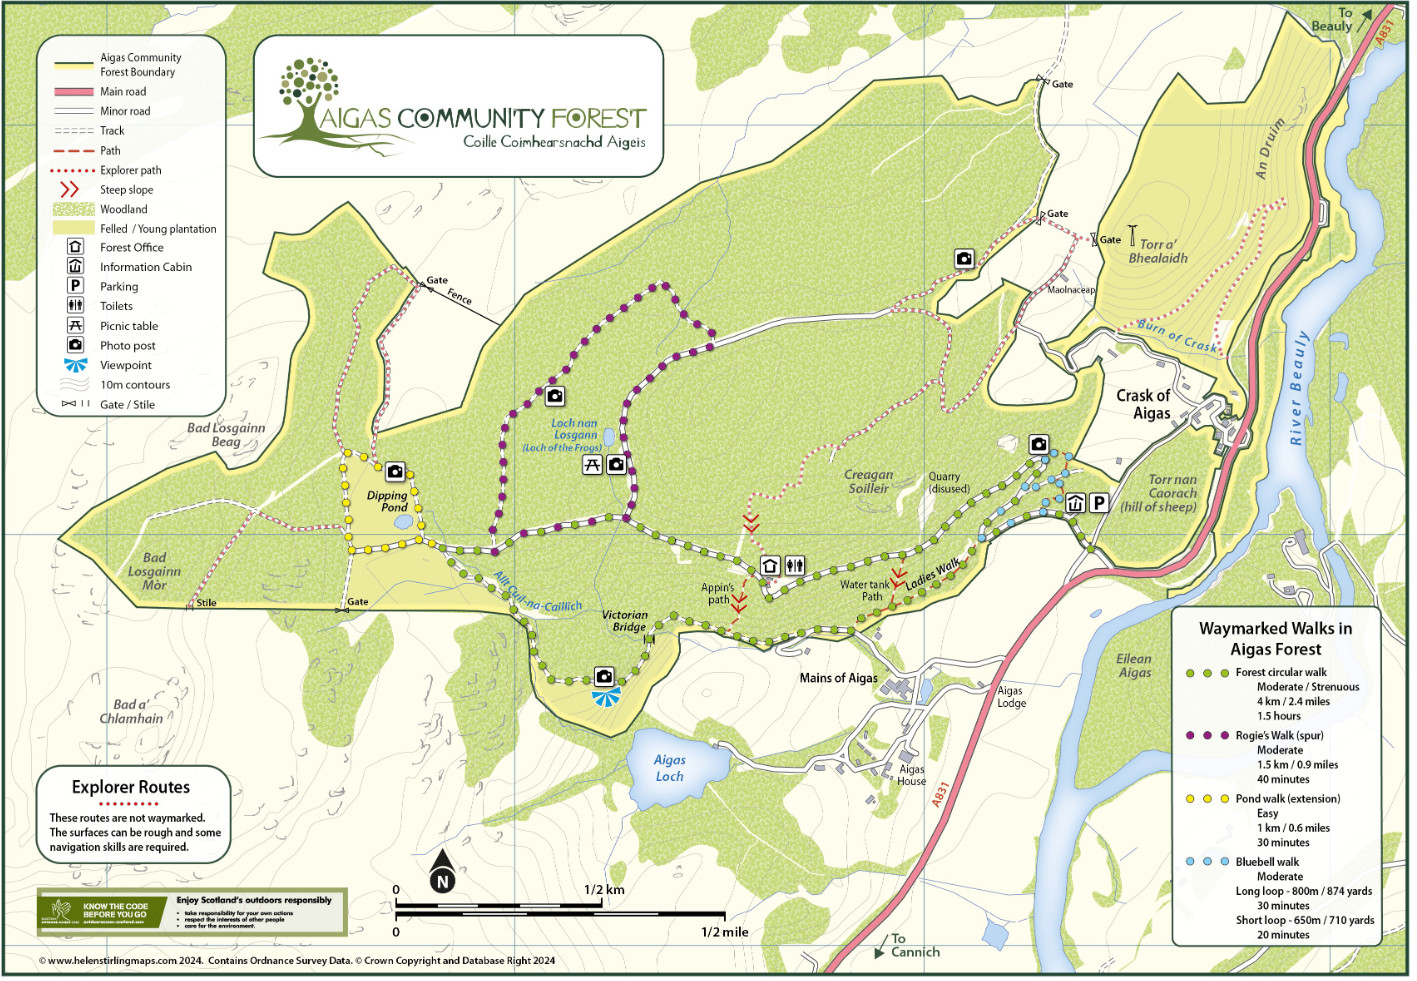 Aigas Community Forest - Paths and Access